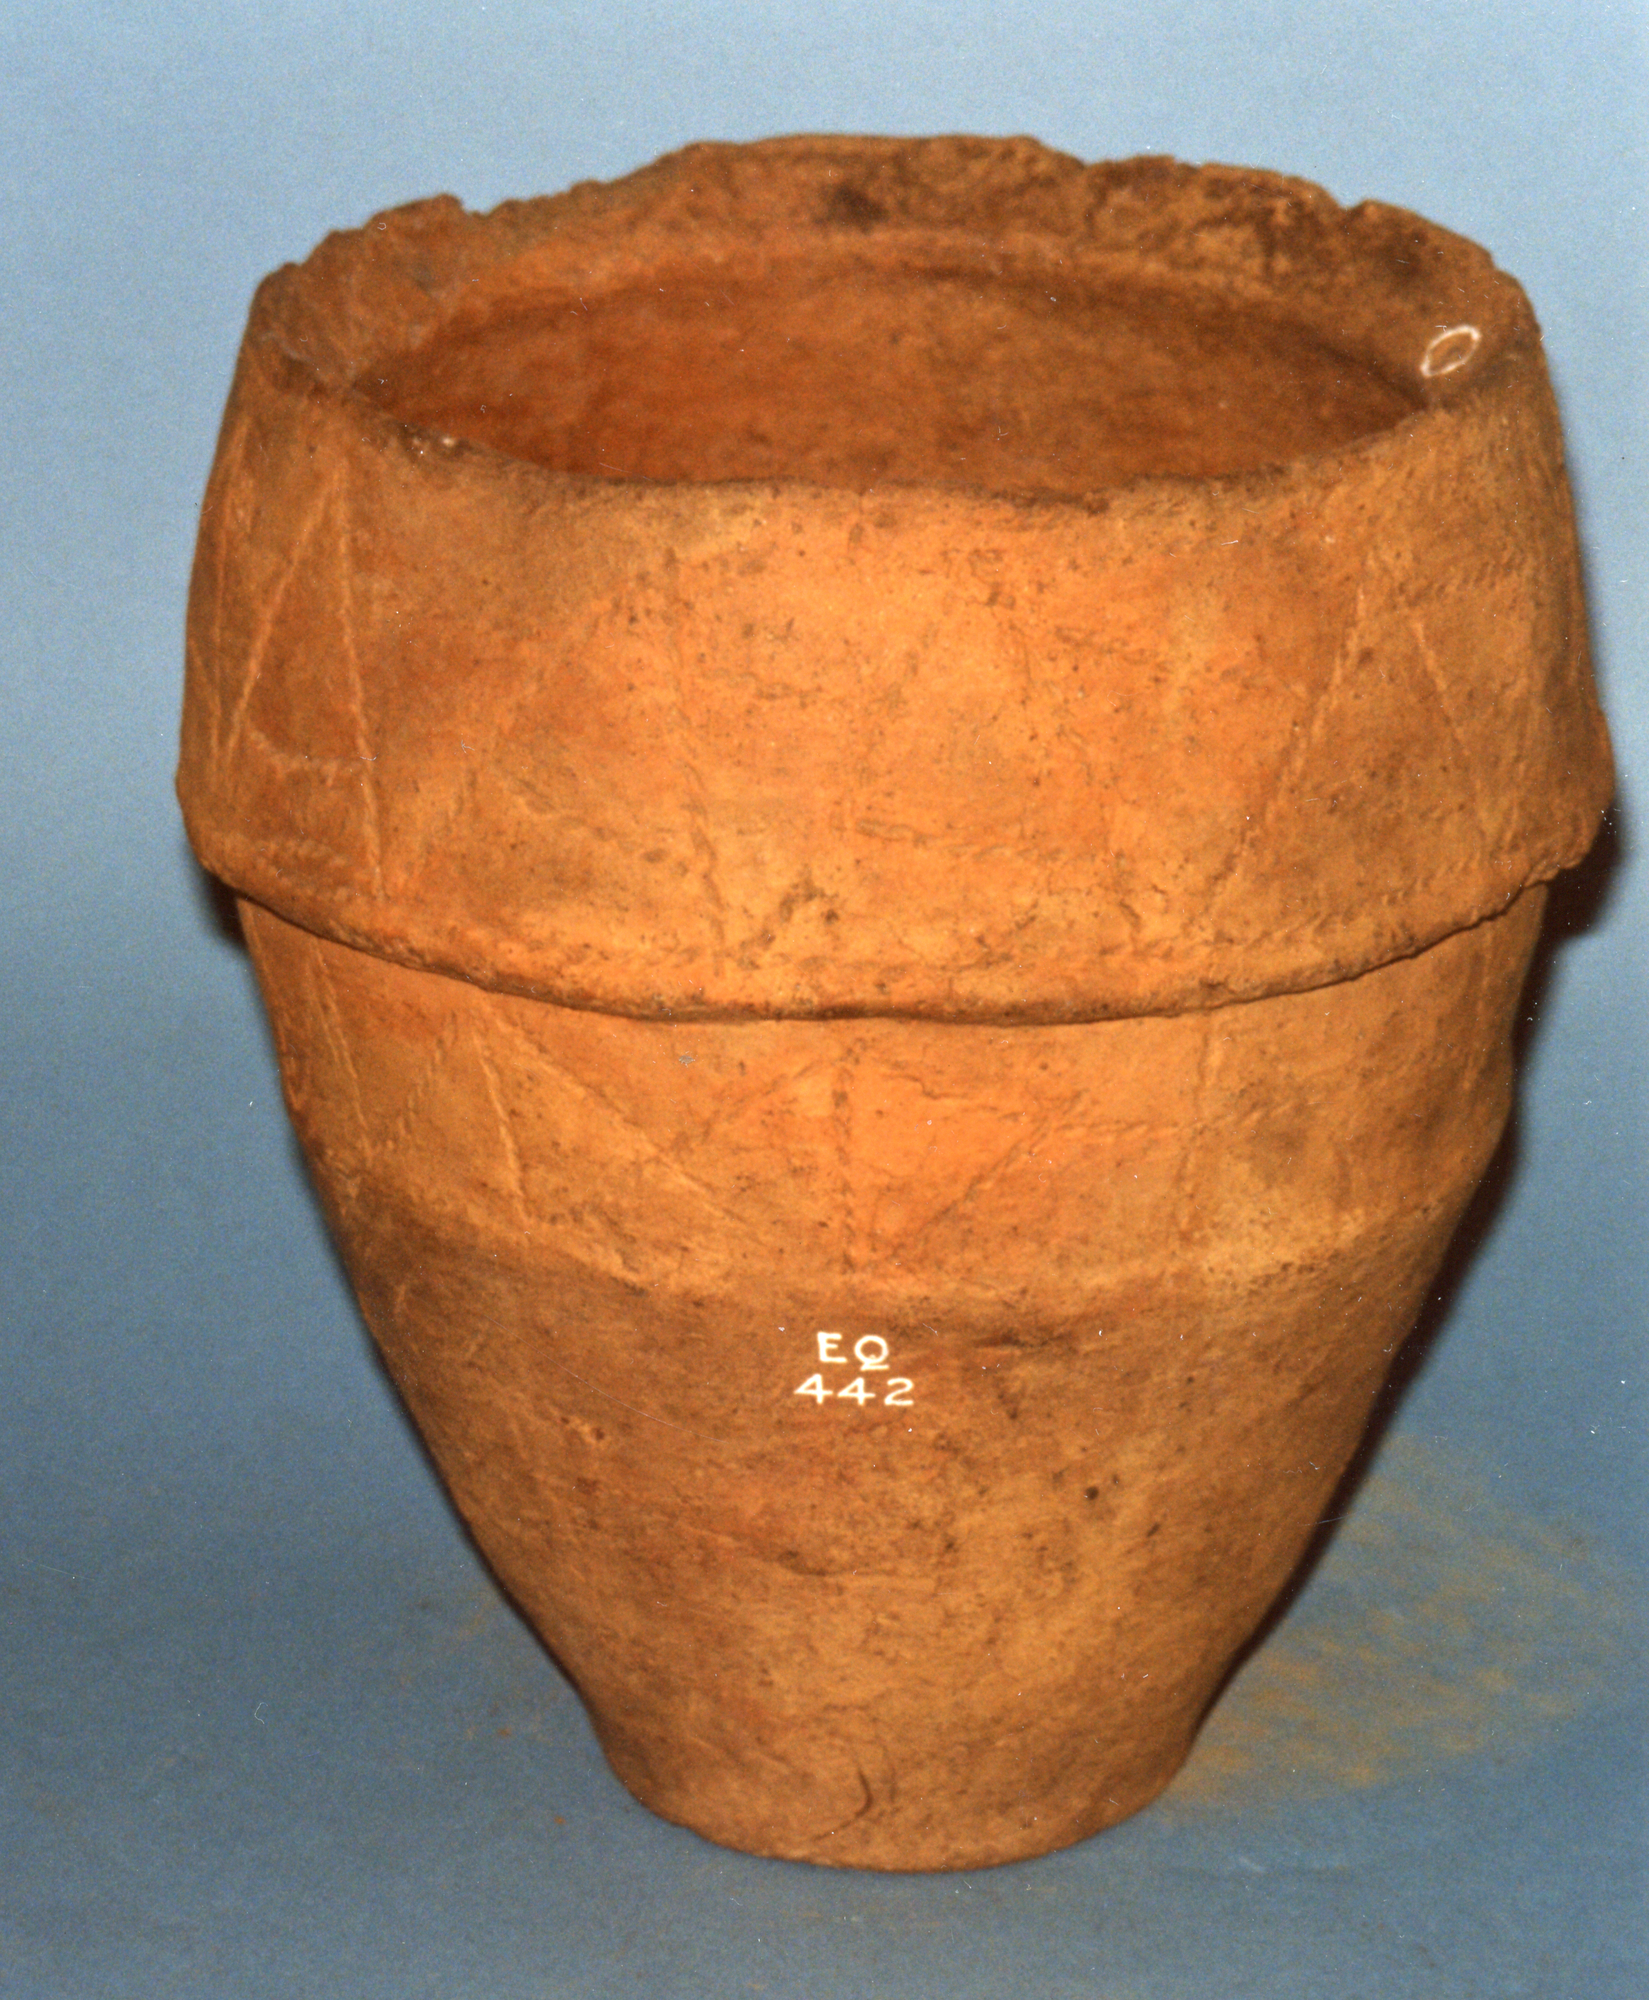 Image of Decorated cinerary urn with overhanging rim, from Craigentinny, Midlothian © National Museums Scotland